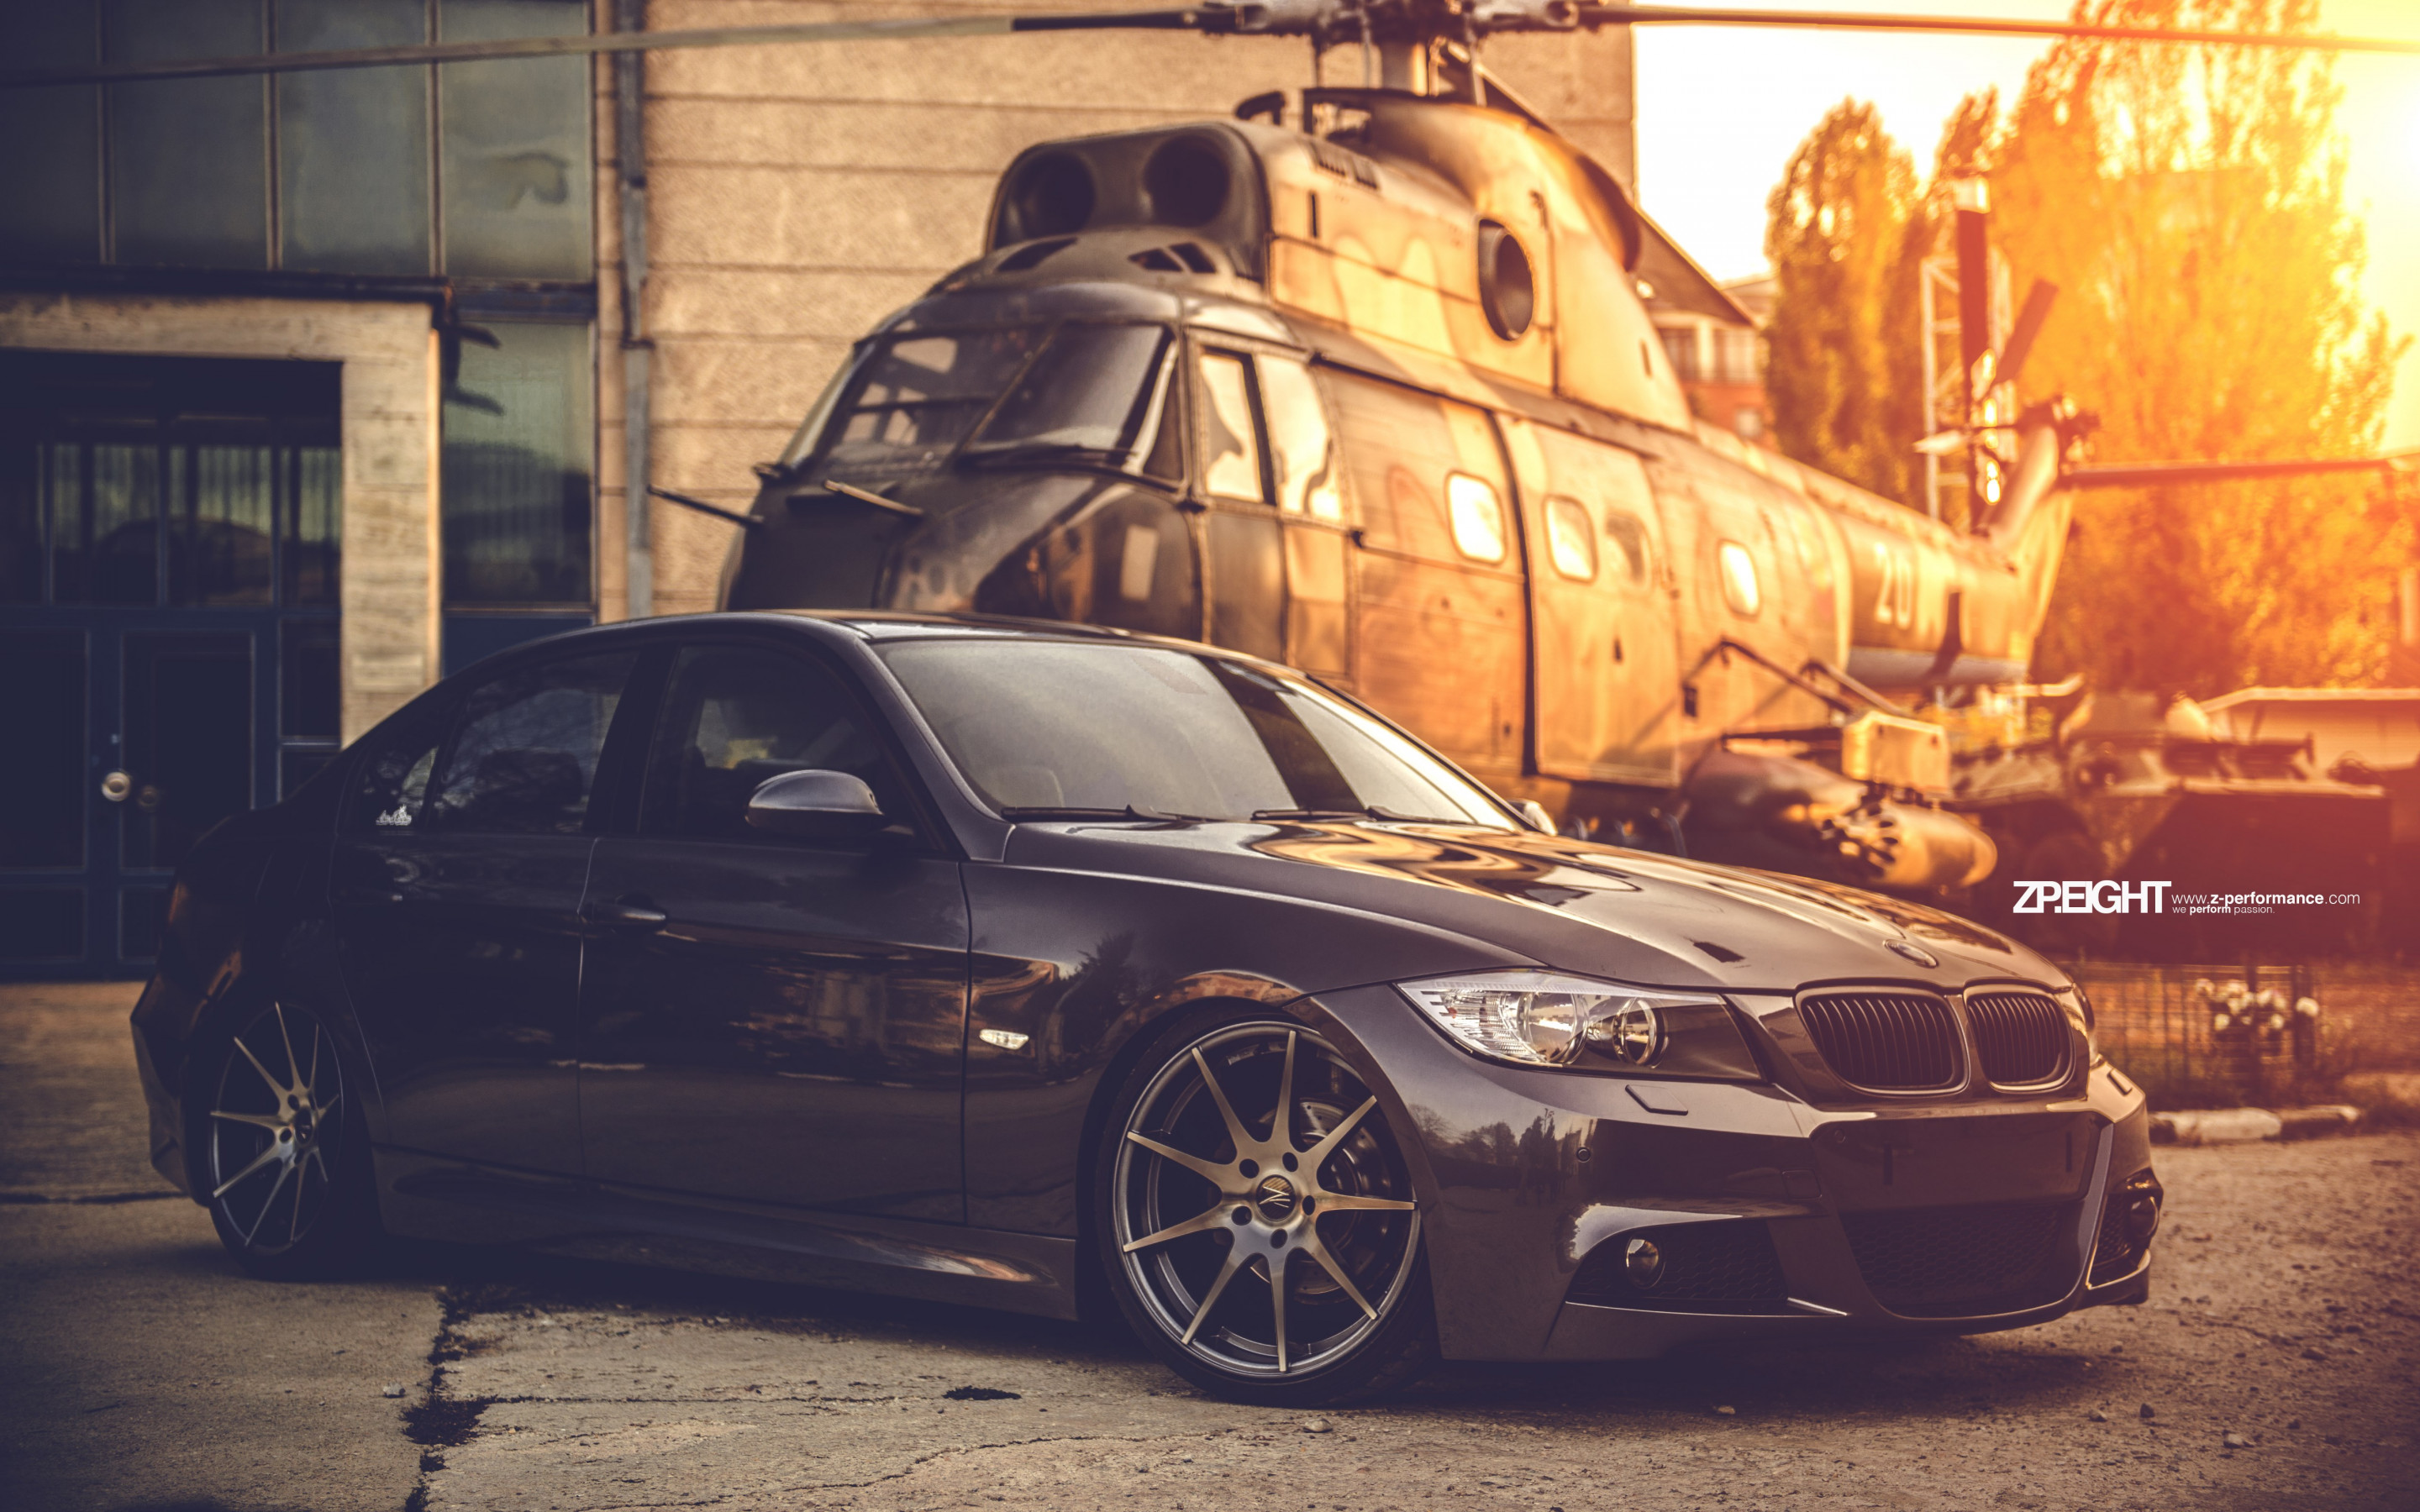 BMW E90 and one helicopter wallpaper 2880x1800